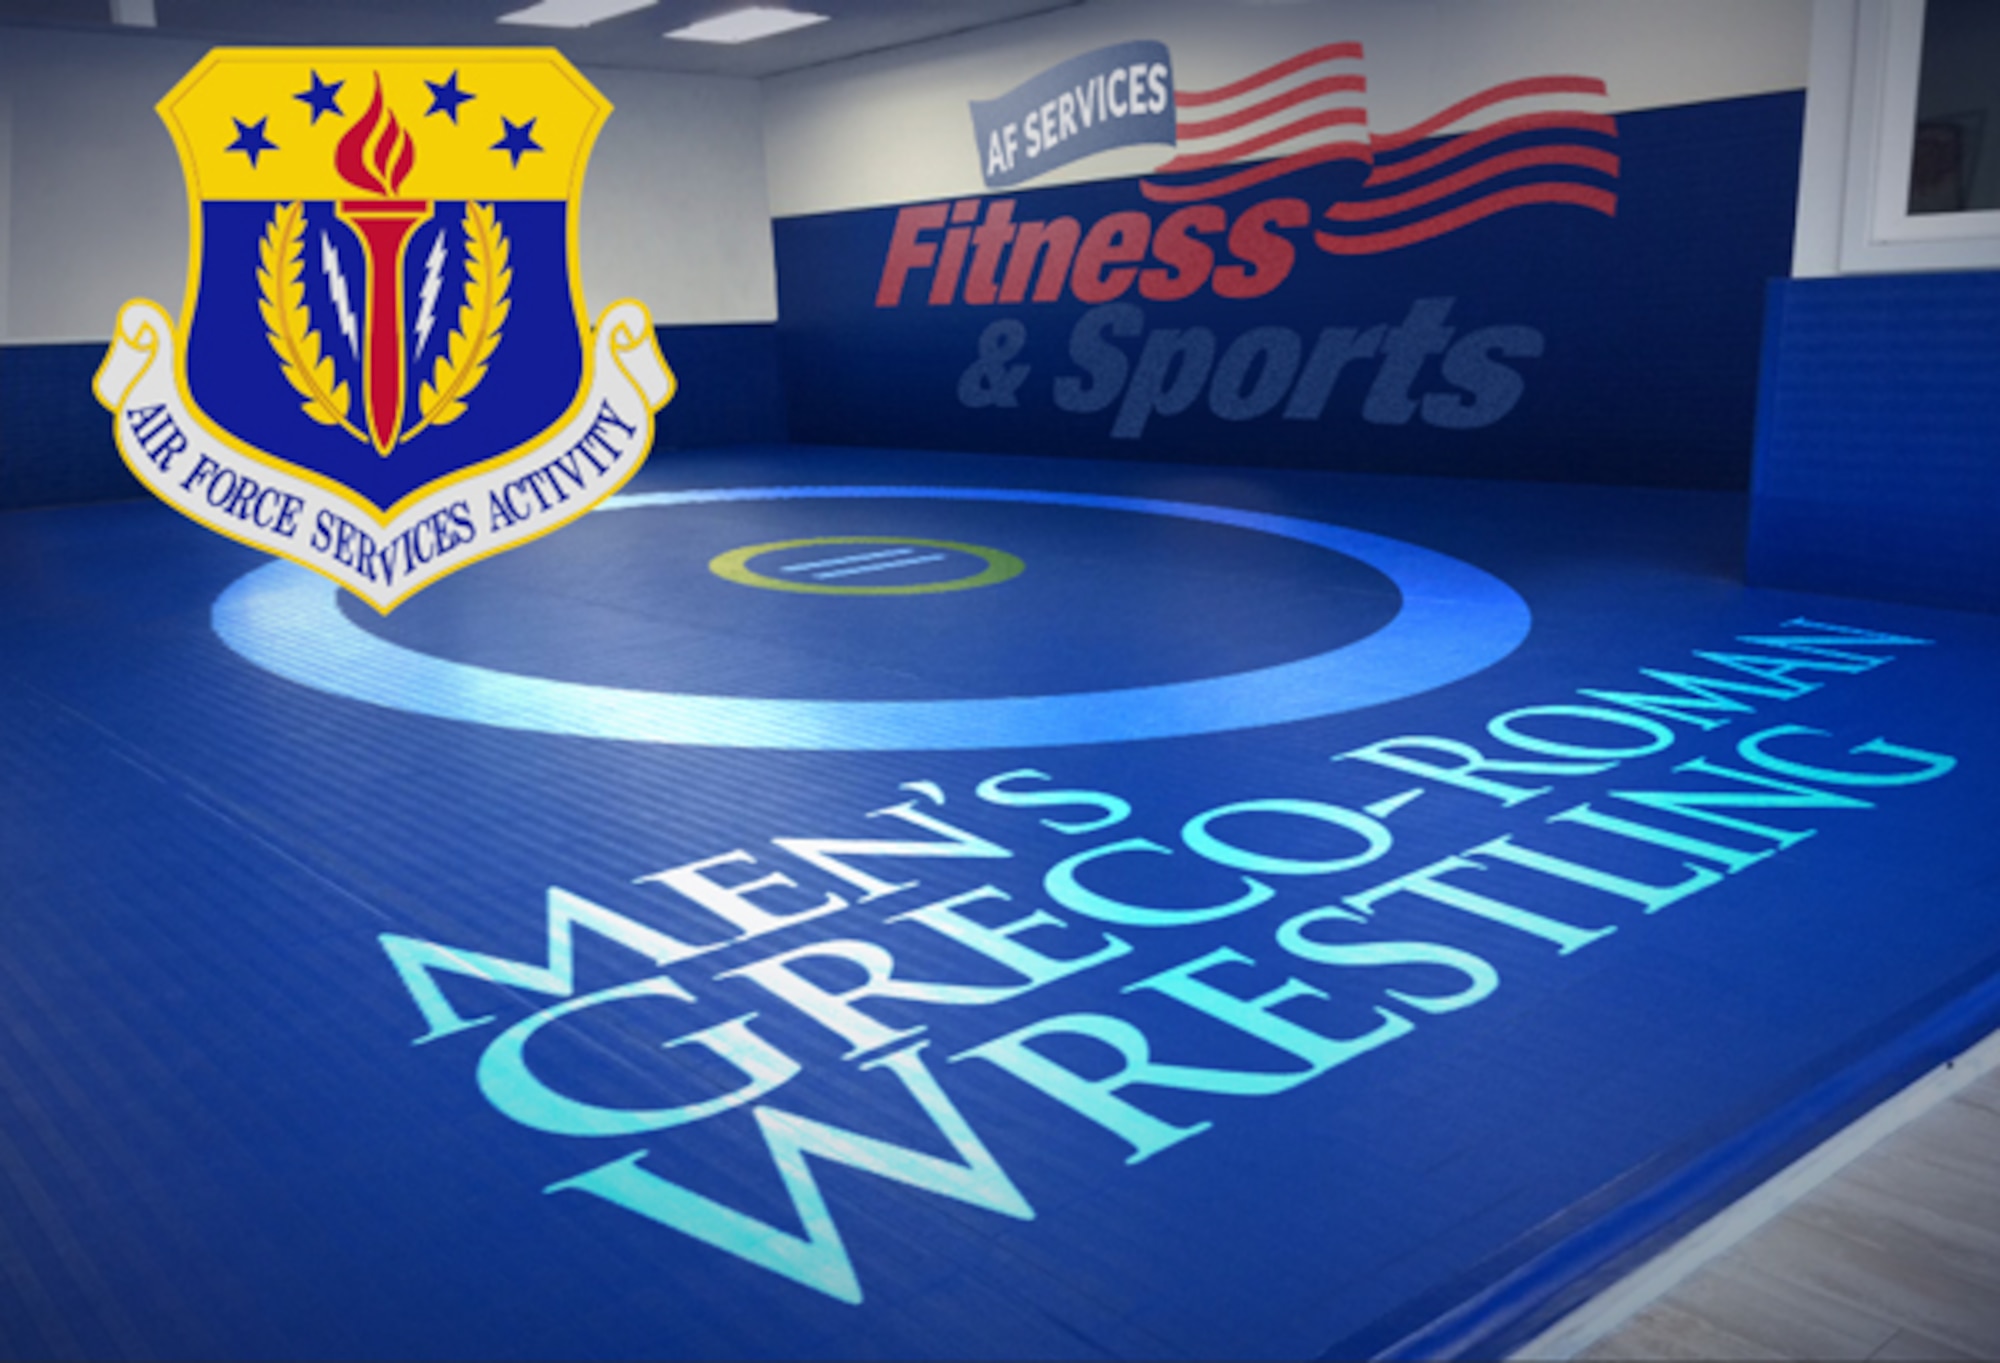 Air Force Men's Greco-Roman Wrestling (U.S. Air Force graphic/Greg Hand)